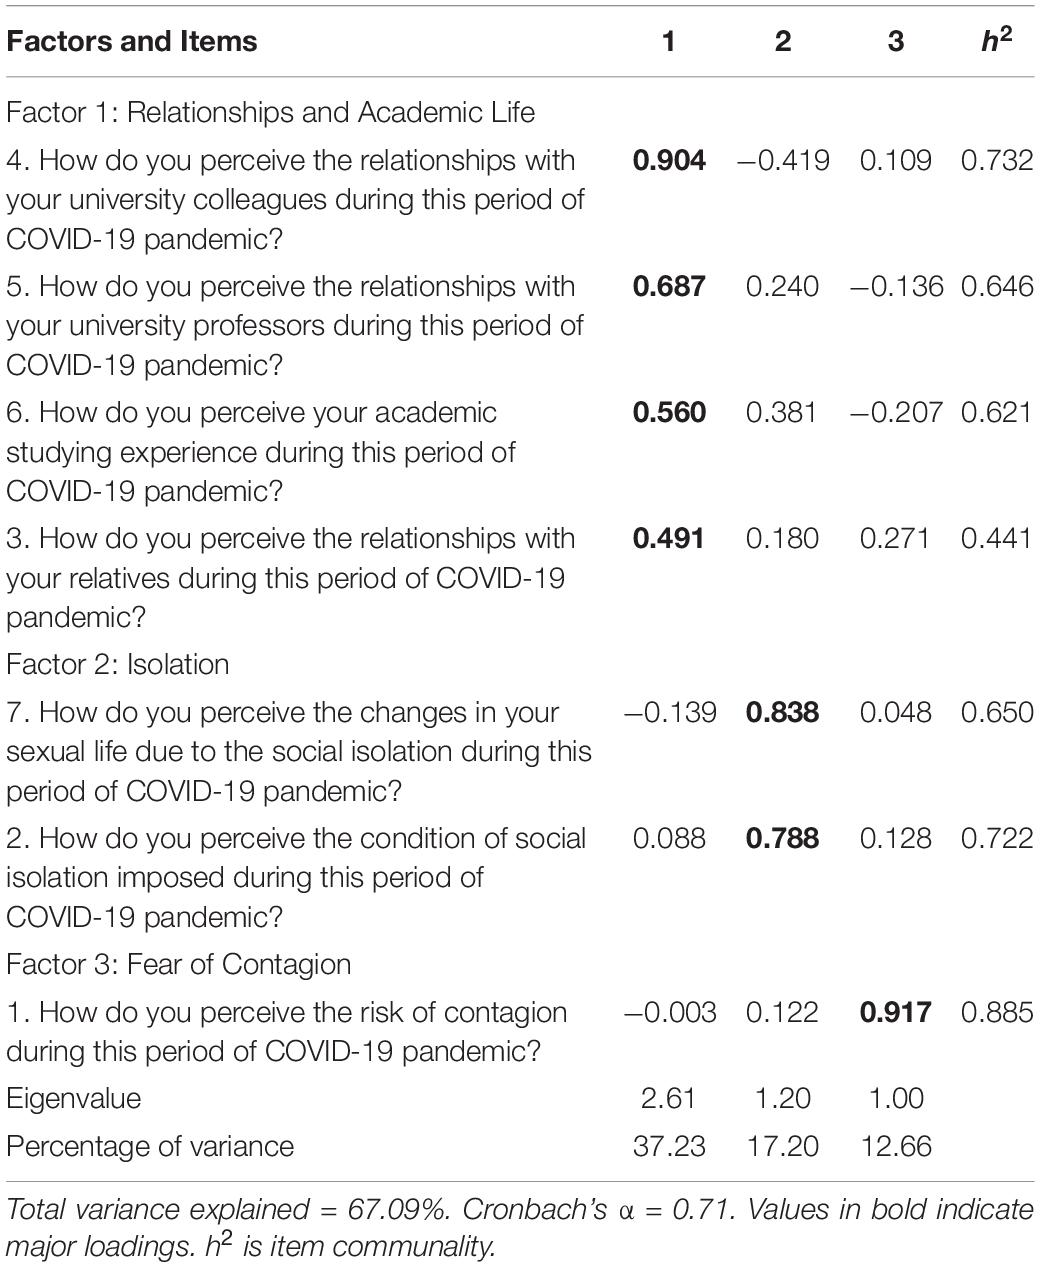 write 3 research quantitative question about the covid 19 issue